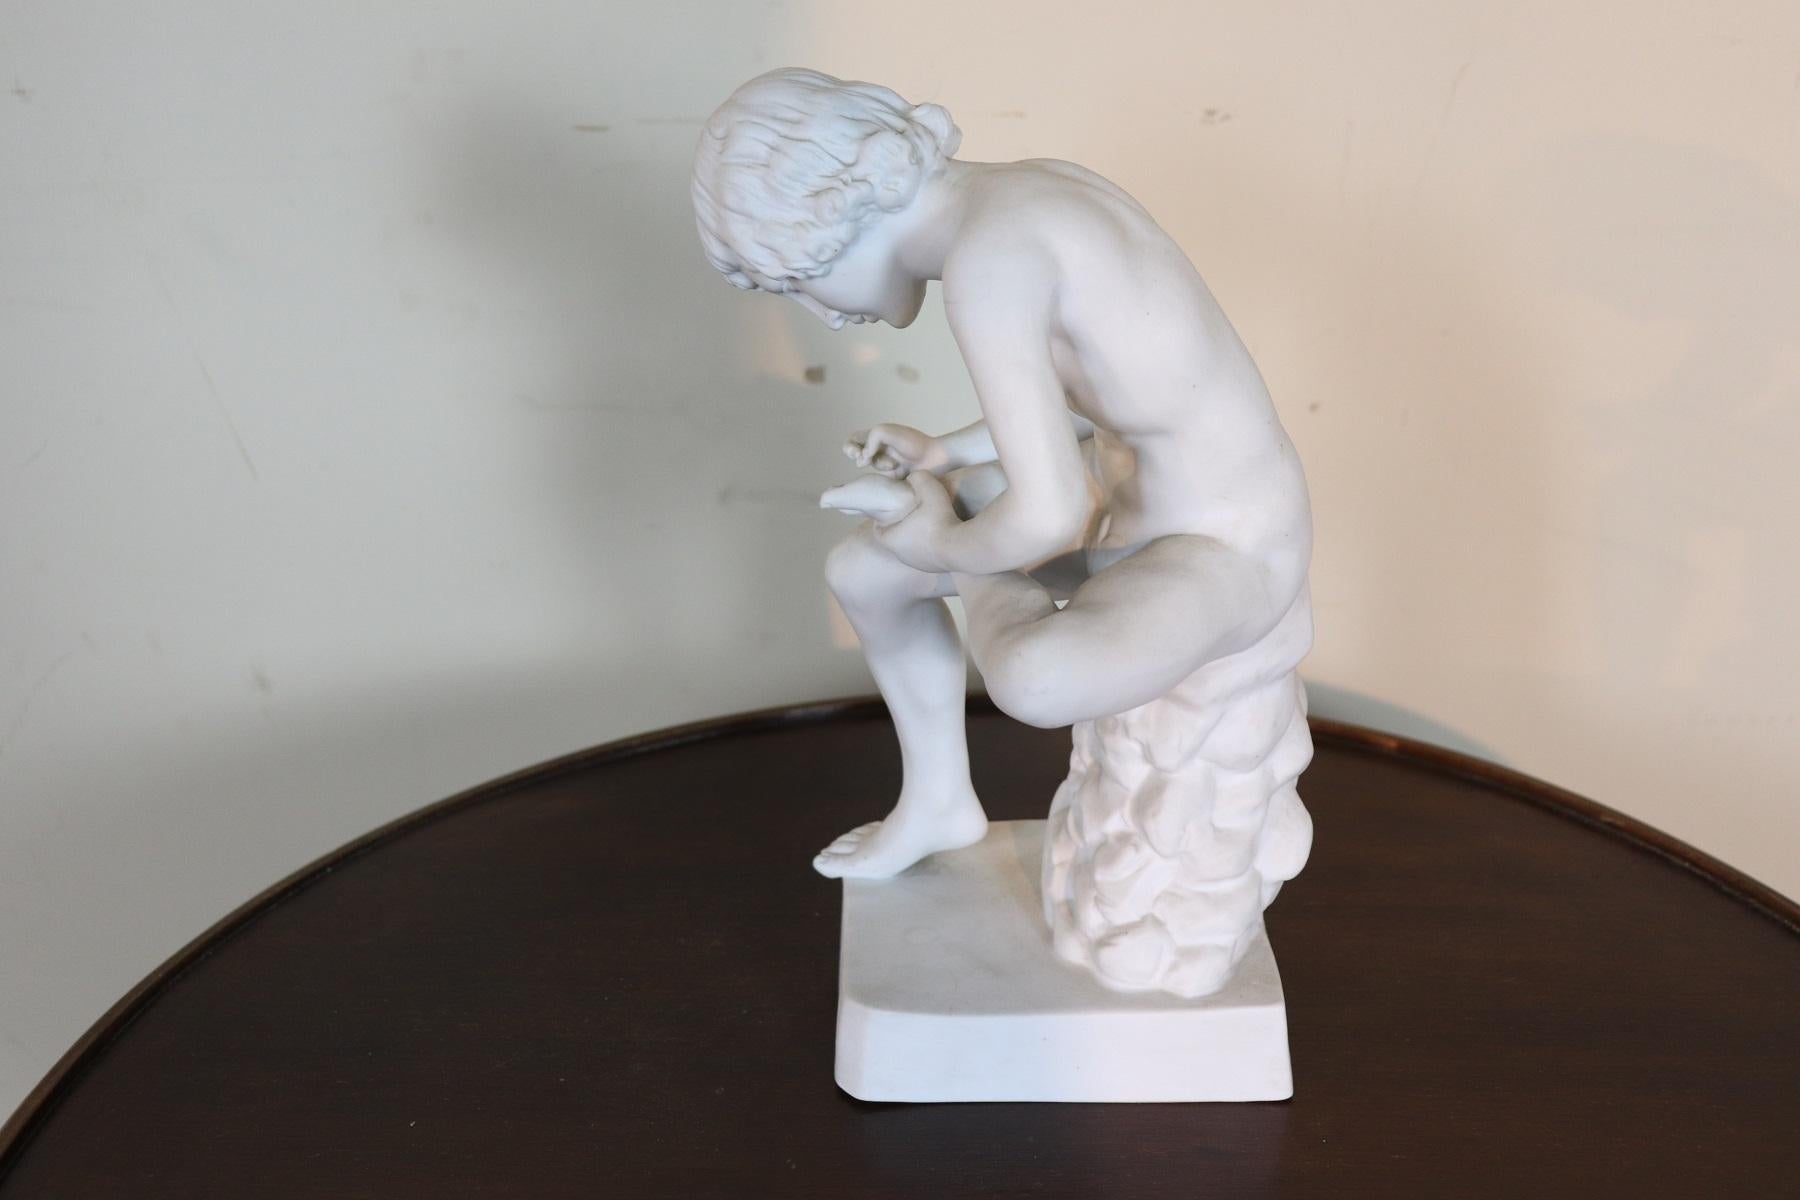 Refined sculpture in porcelain young boy sitting trying to remove a thorn from his foot. Figure of clear classic taste. Mark at the base.